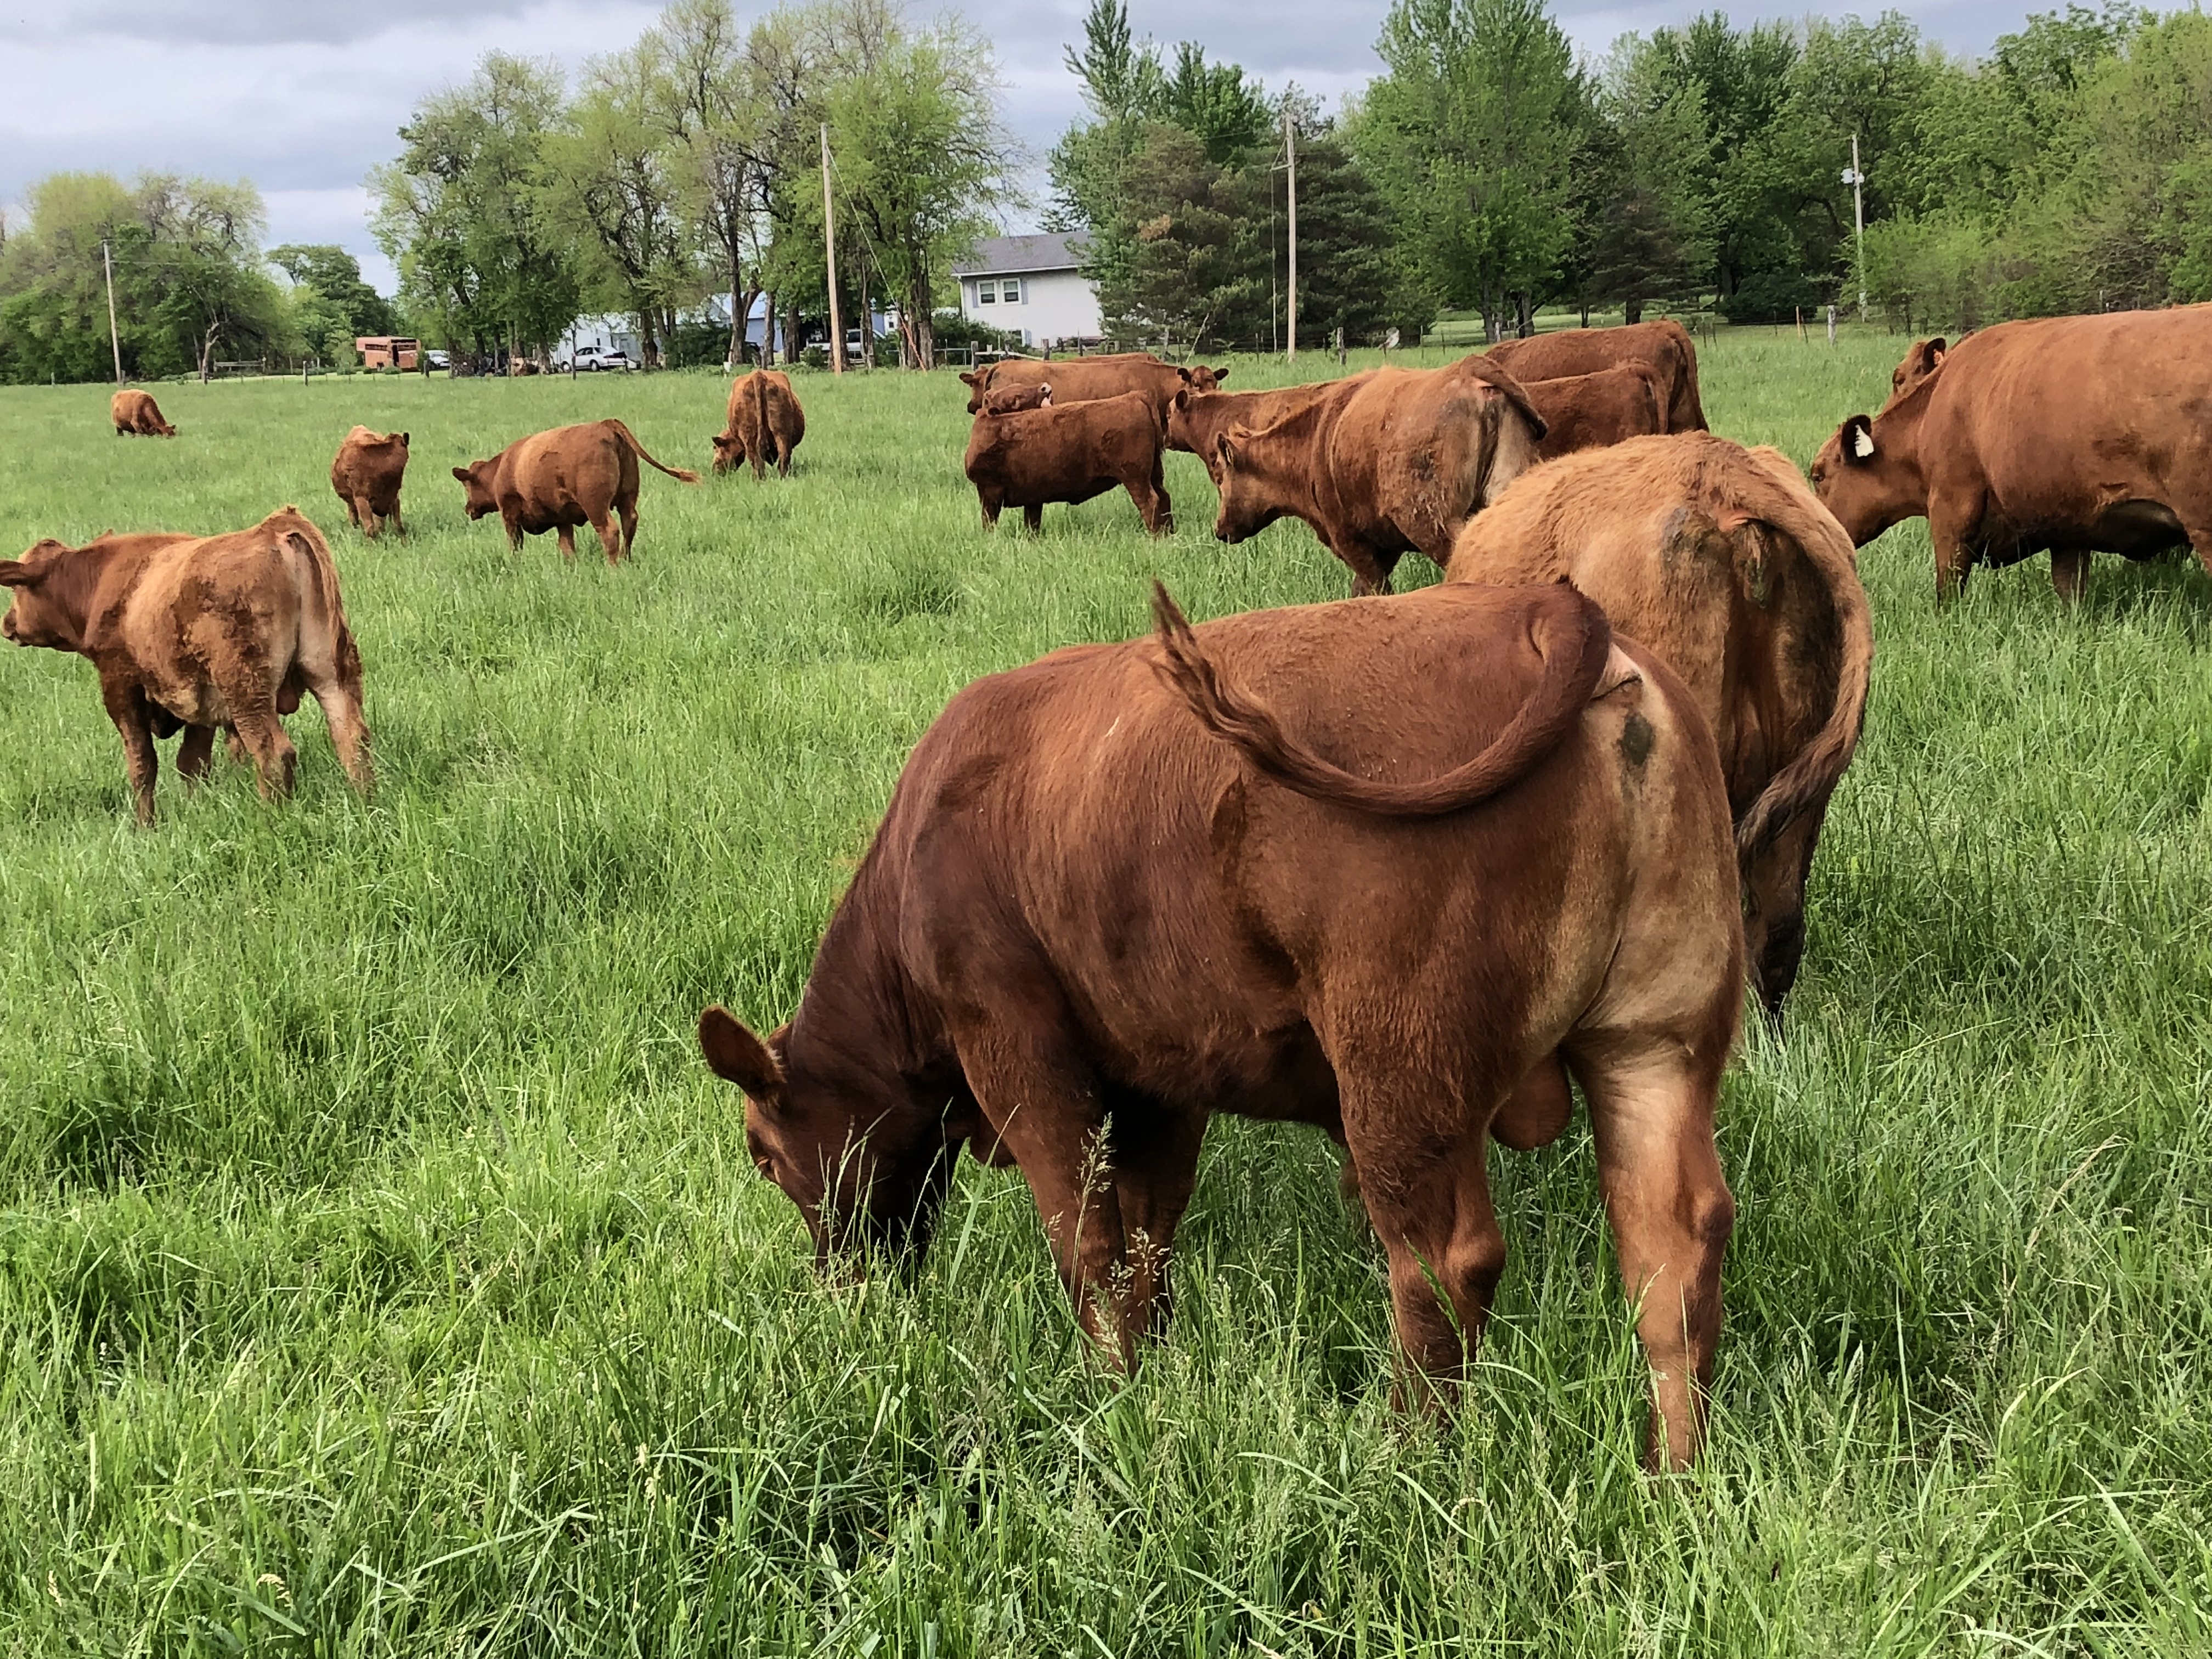 Red Angus